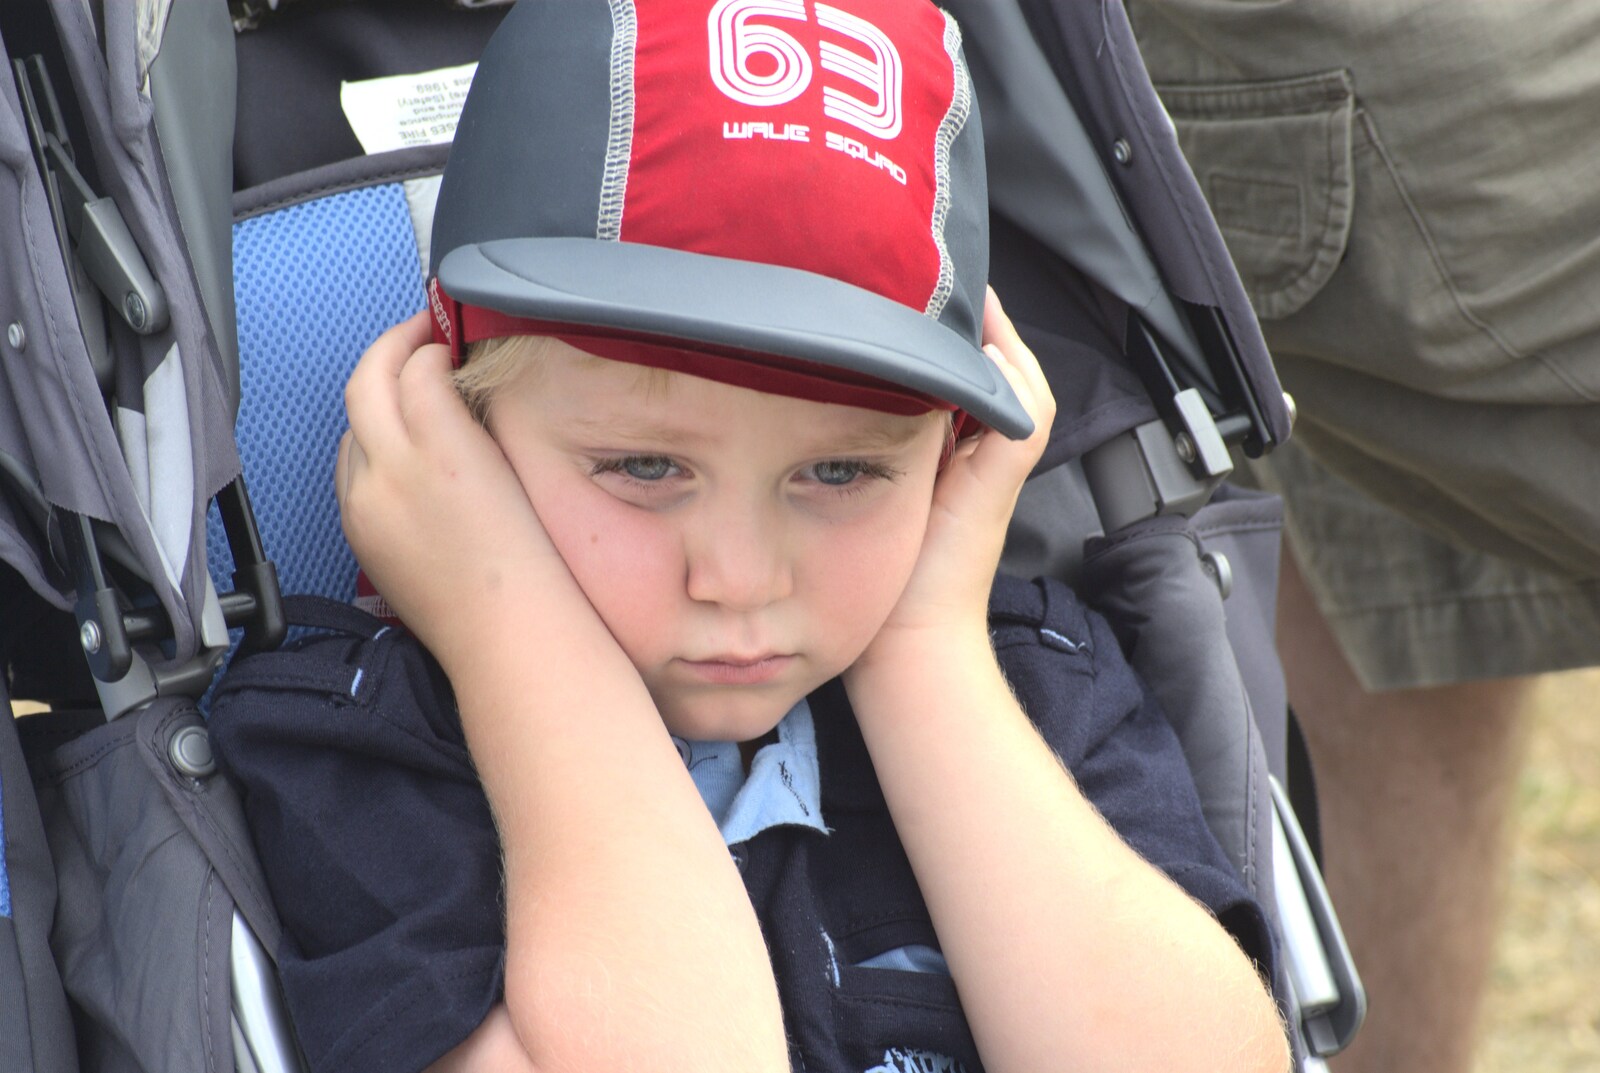 Matthew is not too impressed with the noise from The Eye Show and the Red Arrows, Palgrave, Suffolk - 31st August 2009